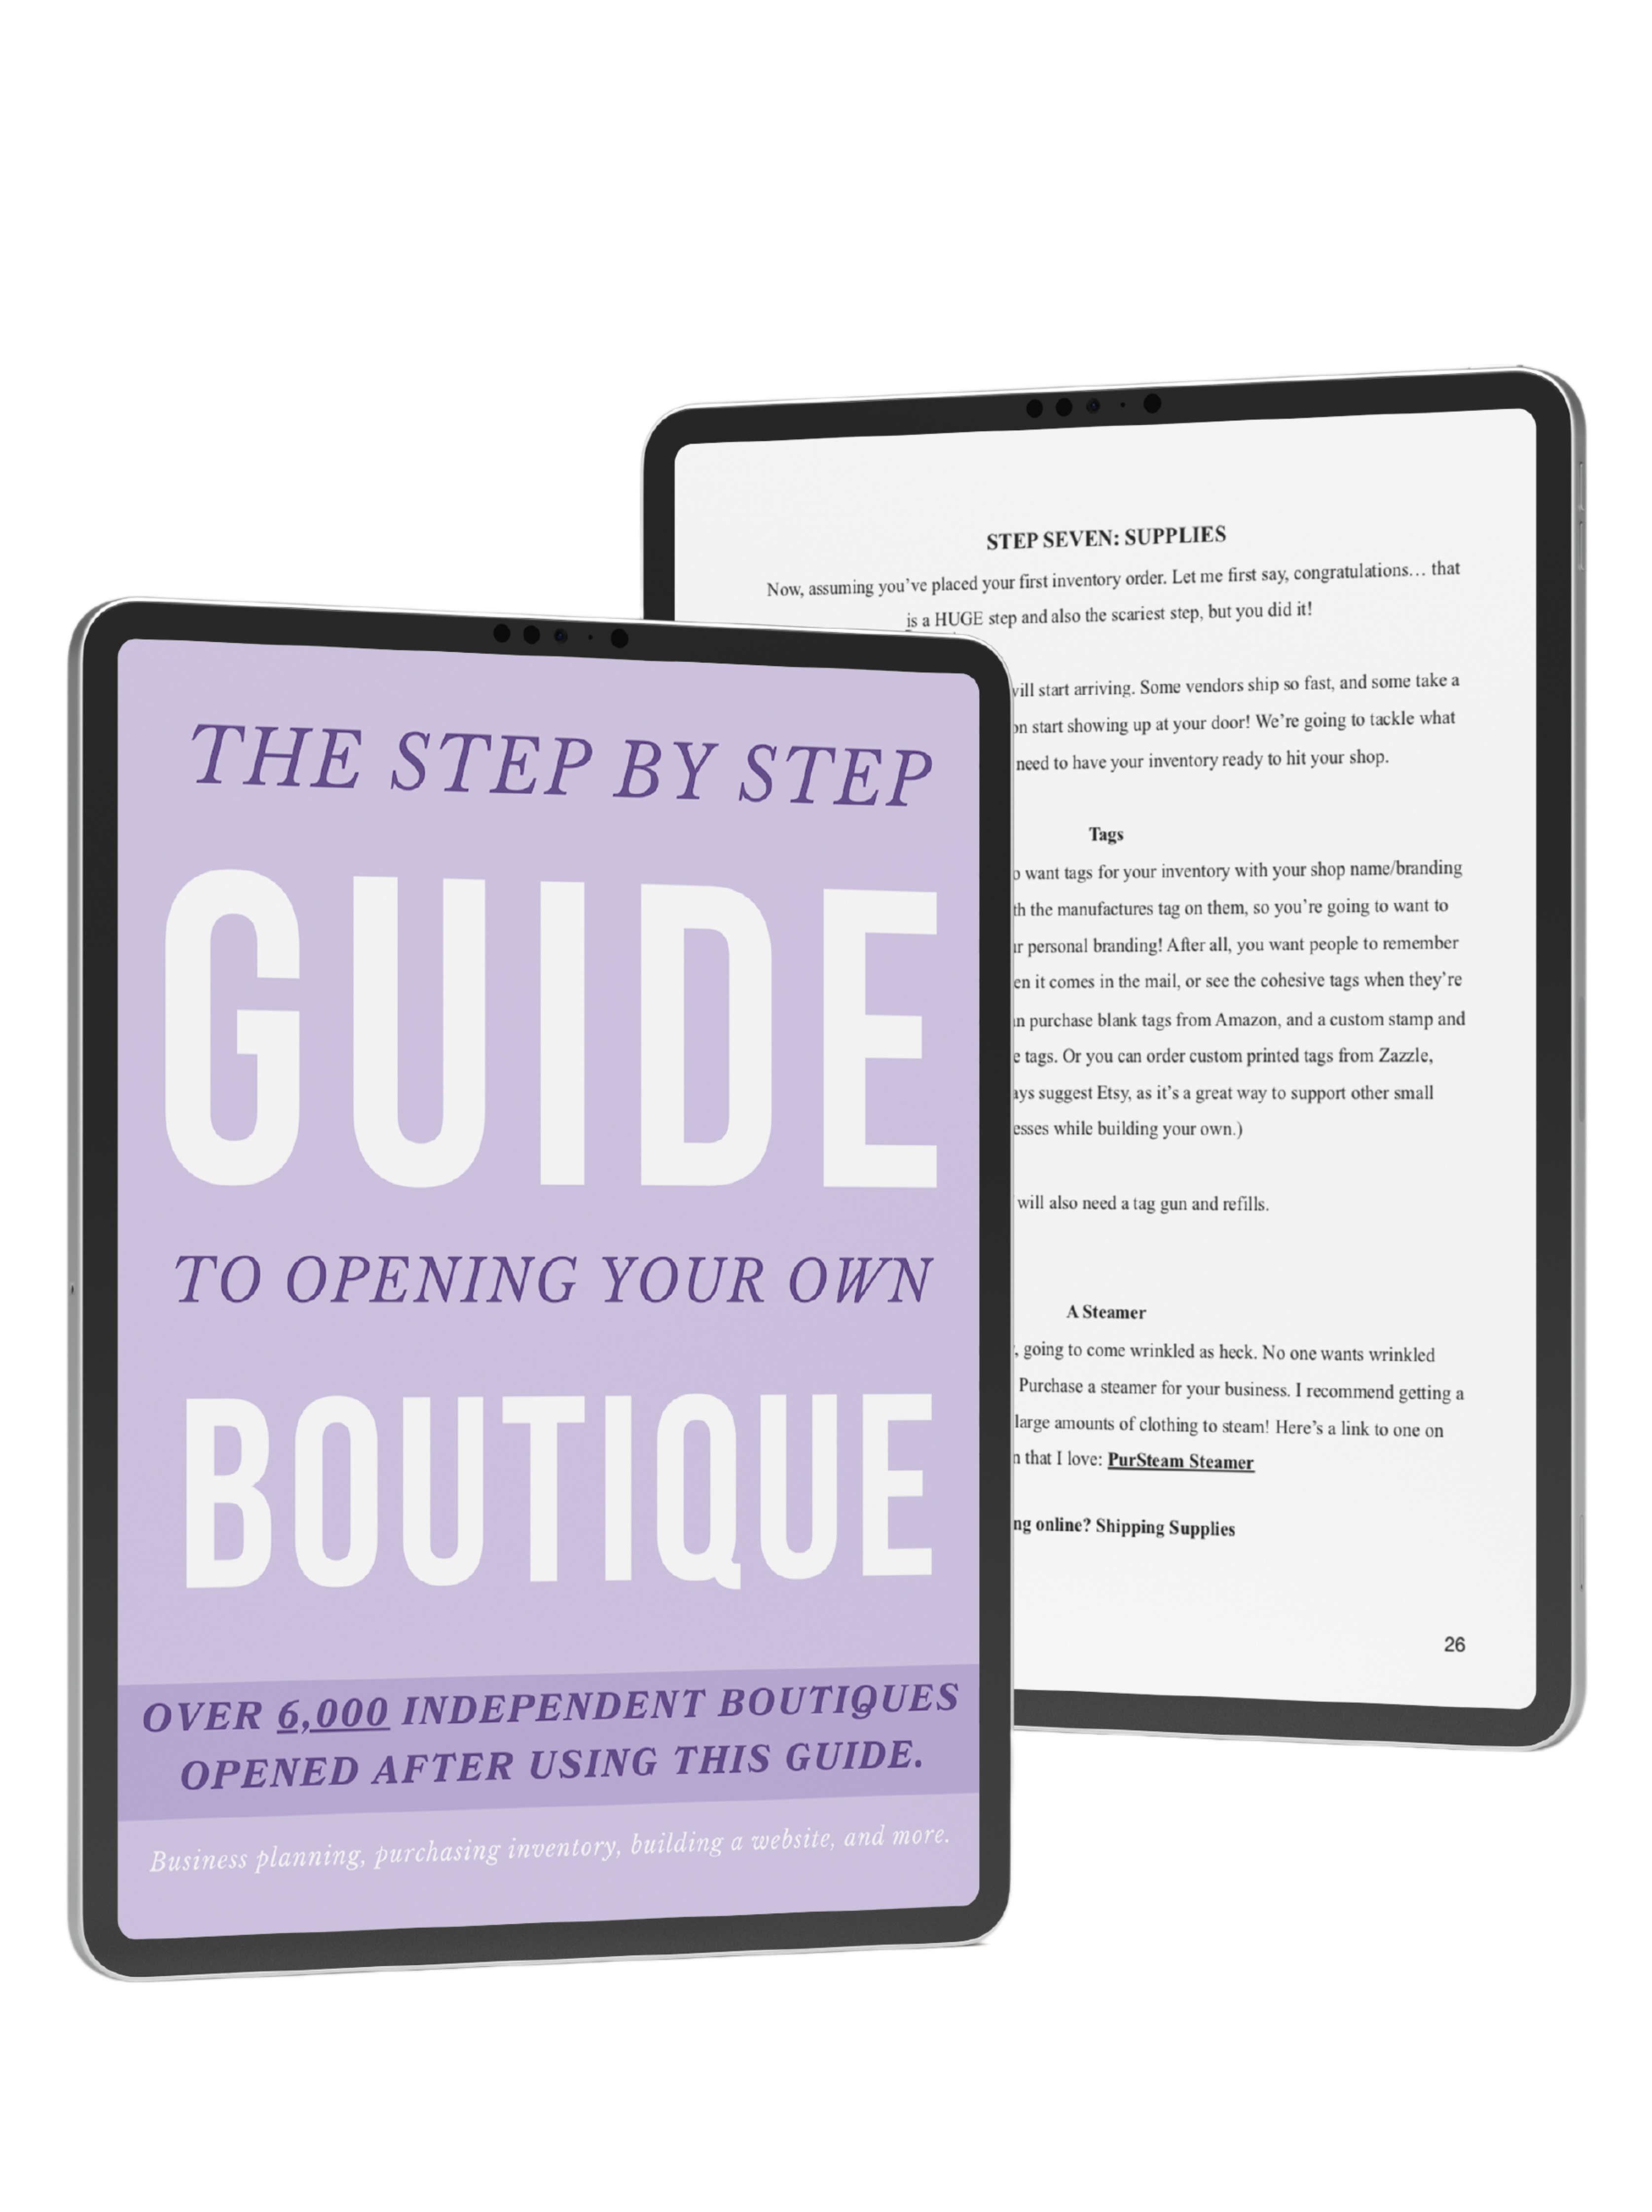 THE STEP BY STEP BOUTIQUE GUIDE